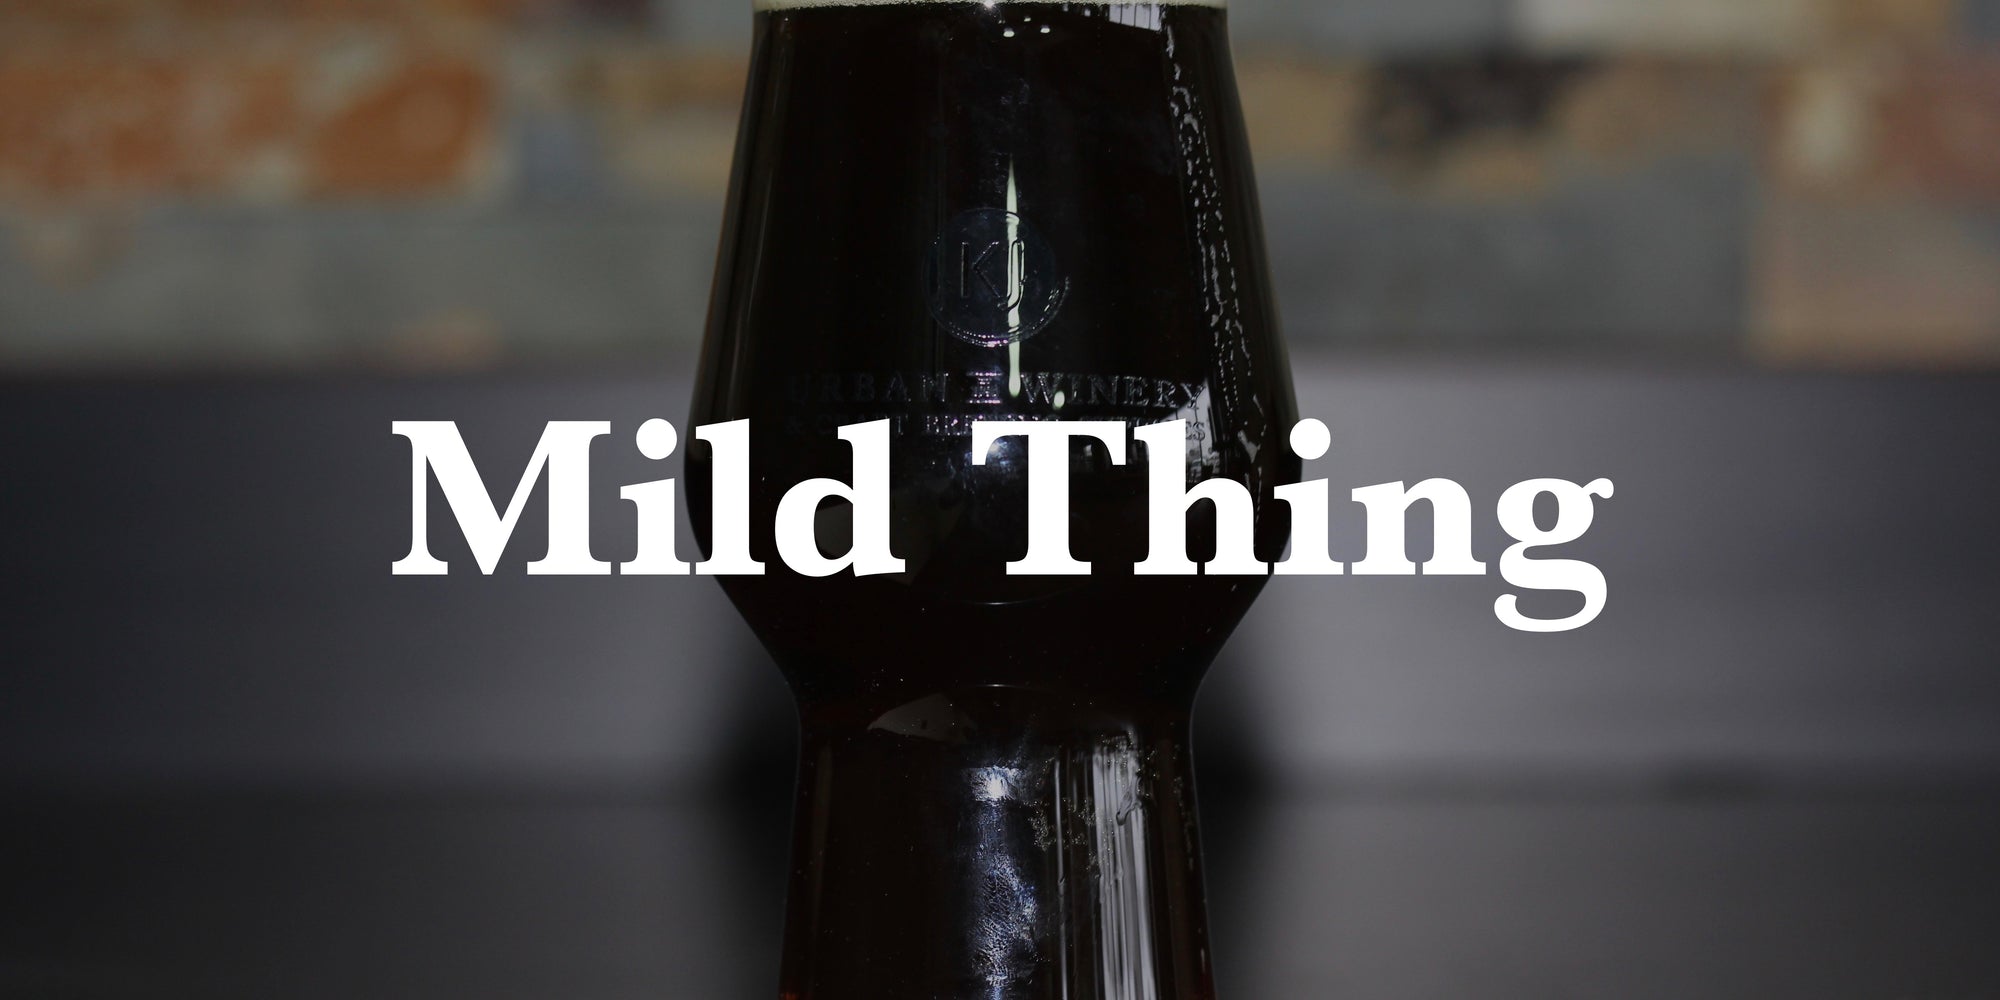 Mild Thing - March 2019 Beer of the Month